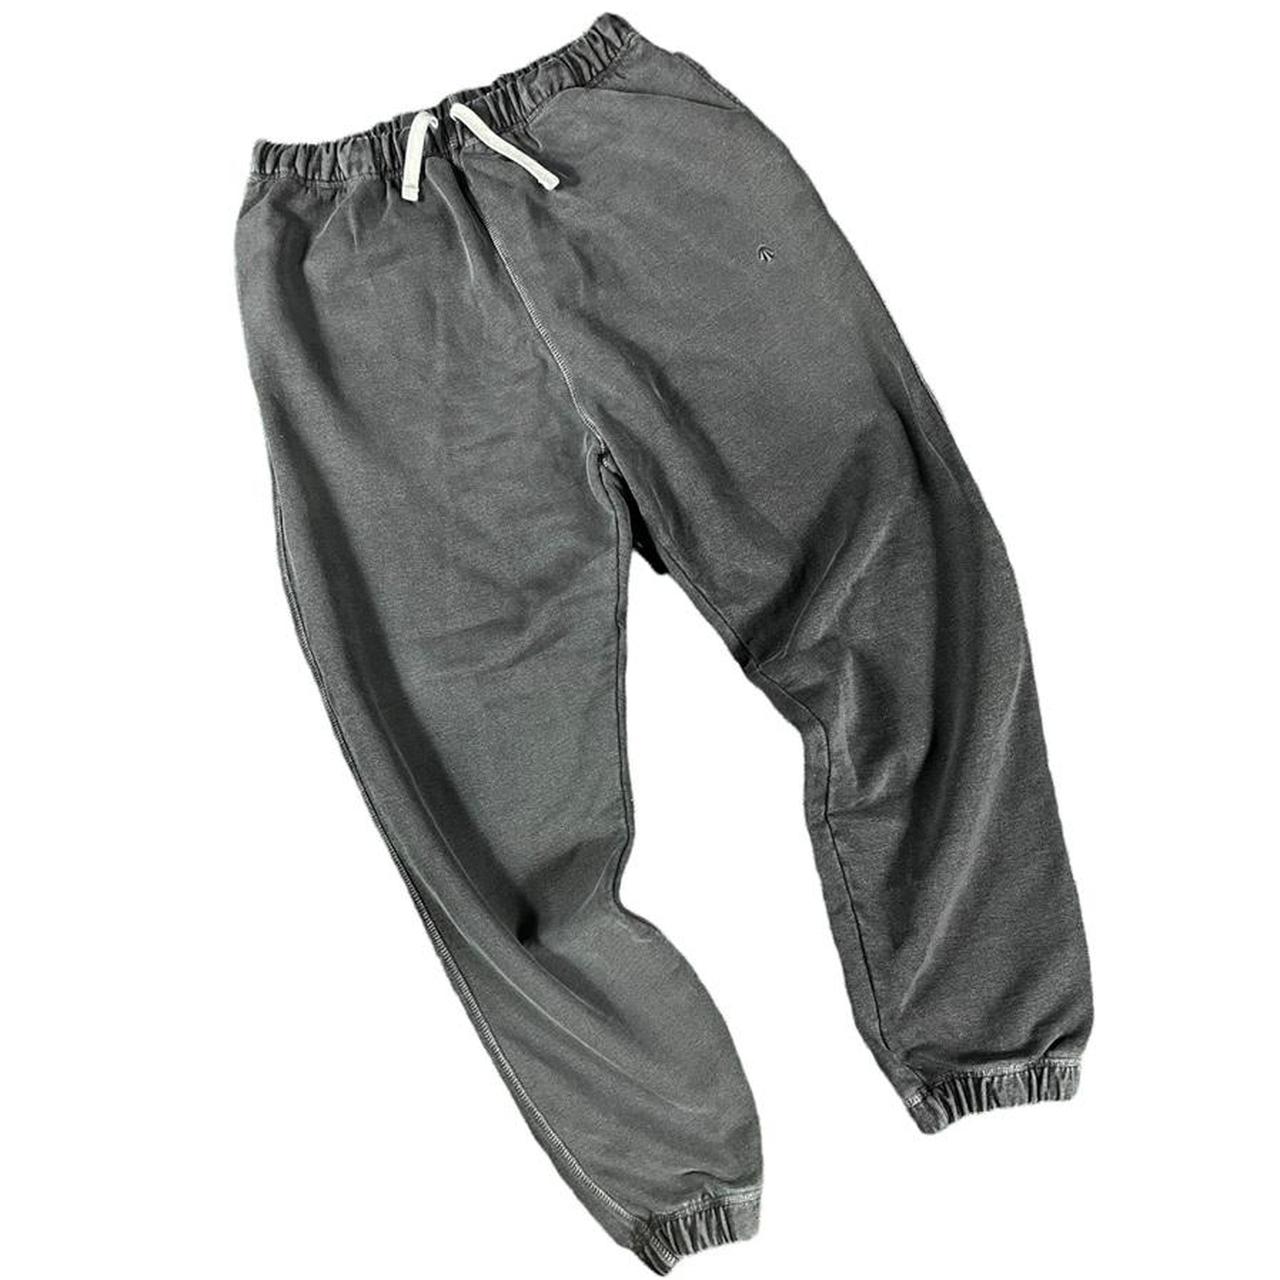 Product Image 1 - Nigel Cabourn Sweatpants

From "The Army